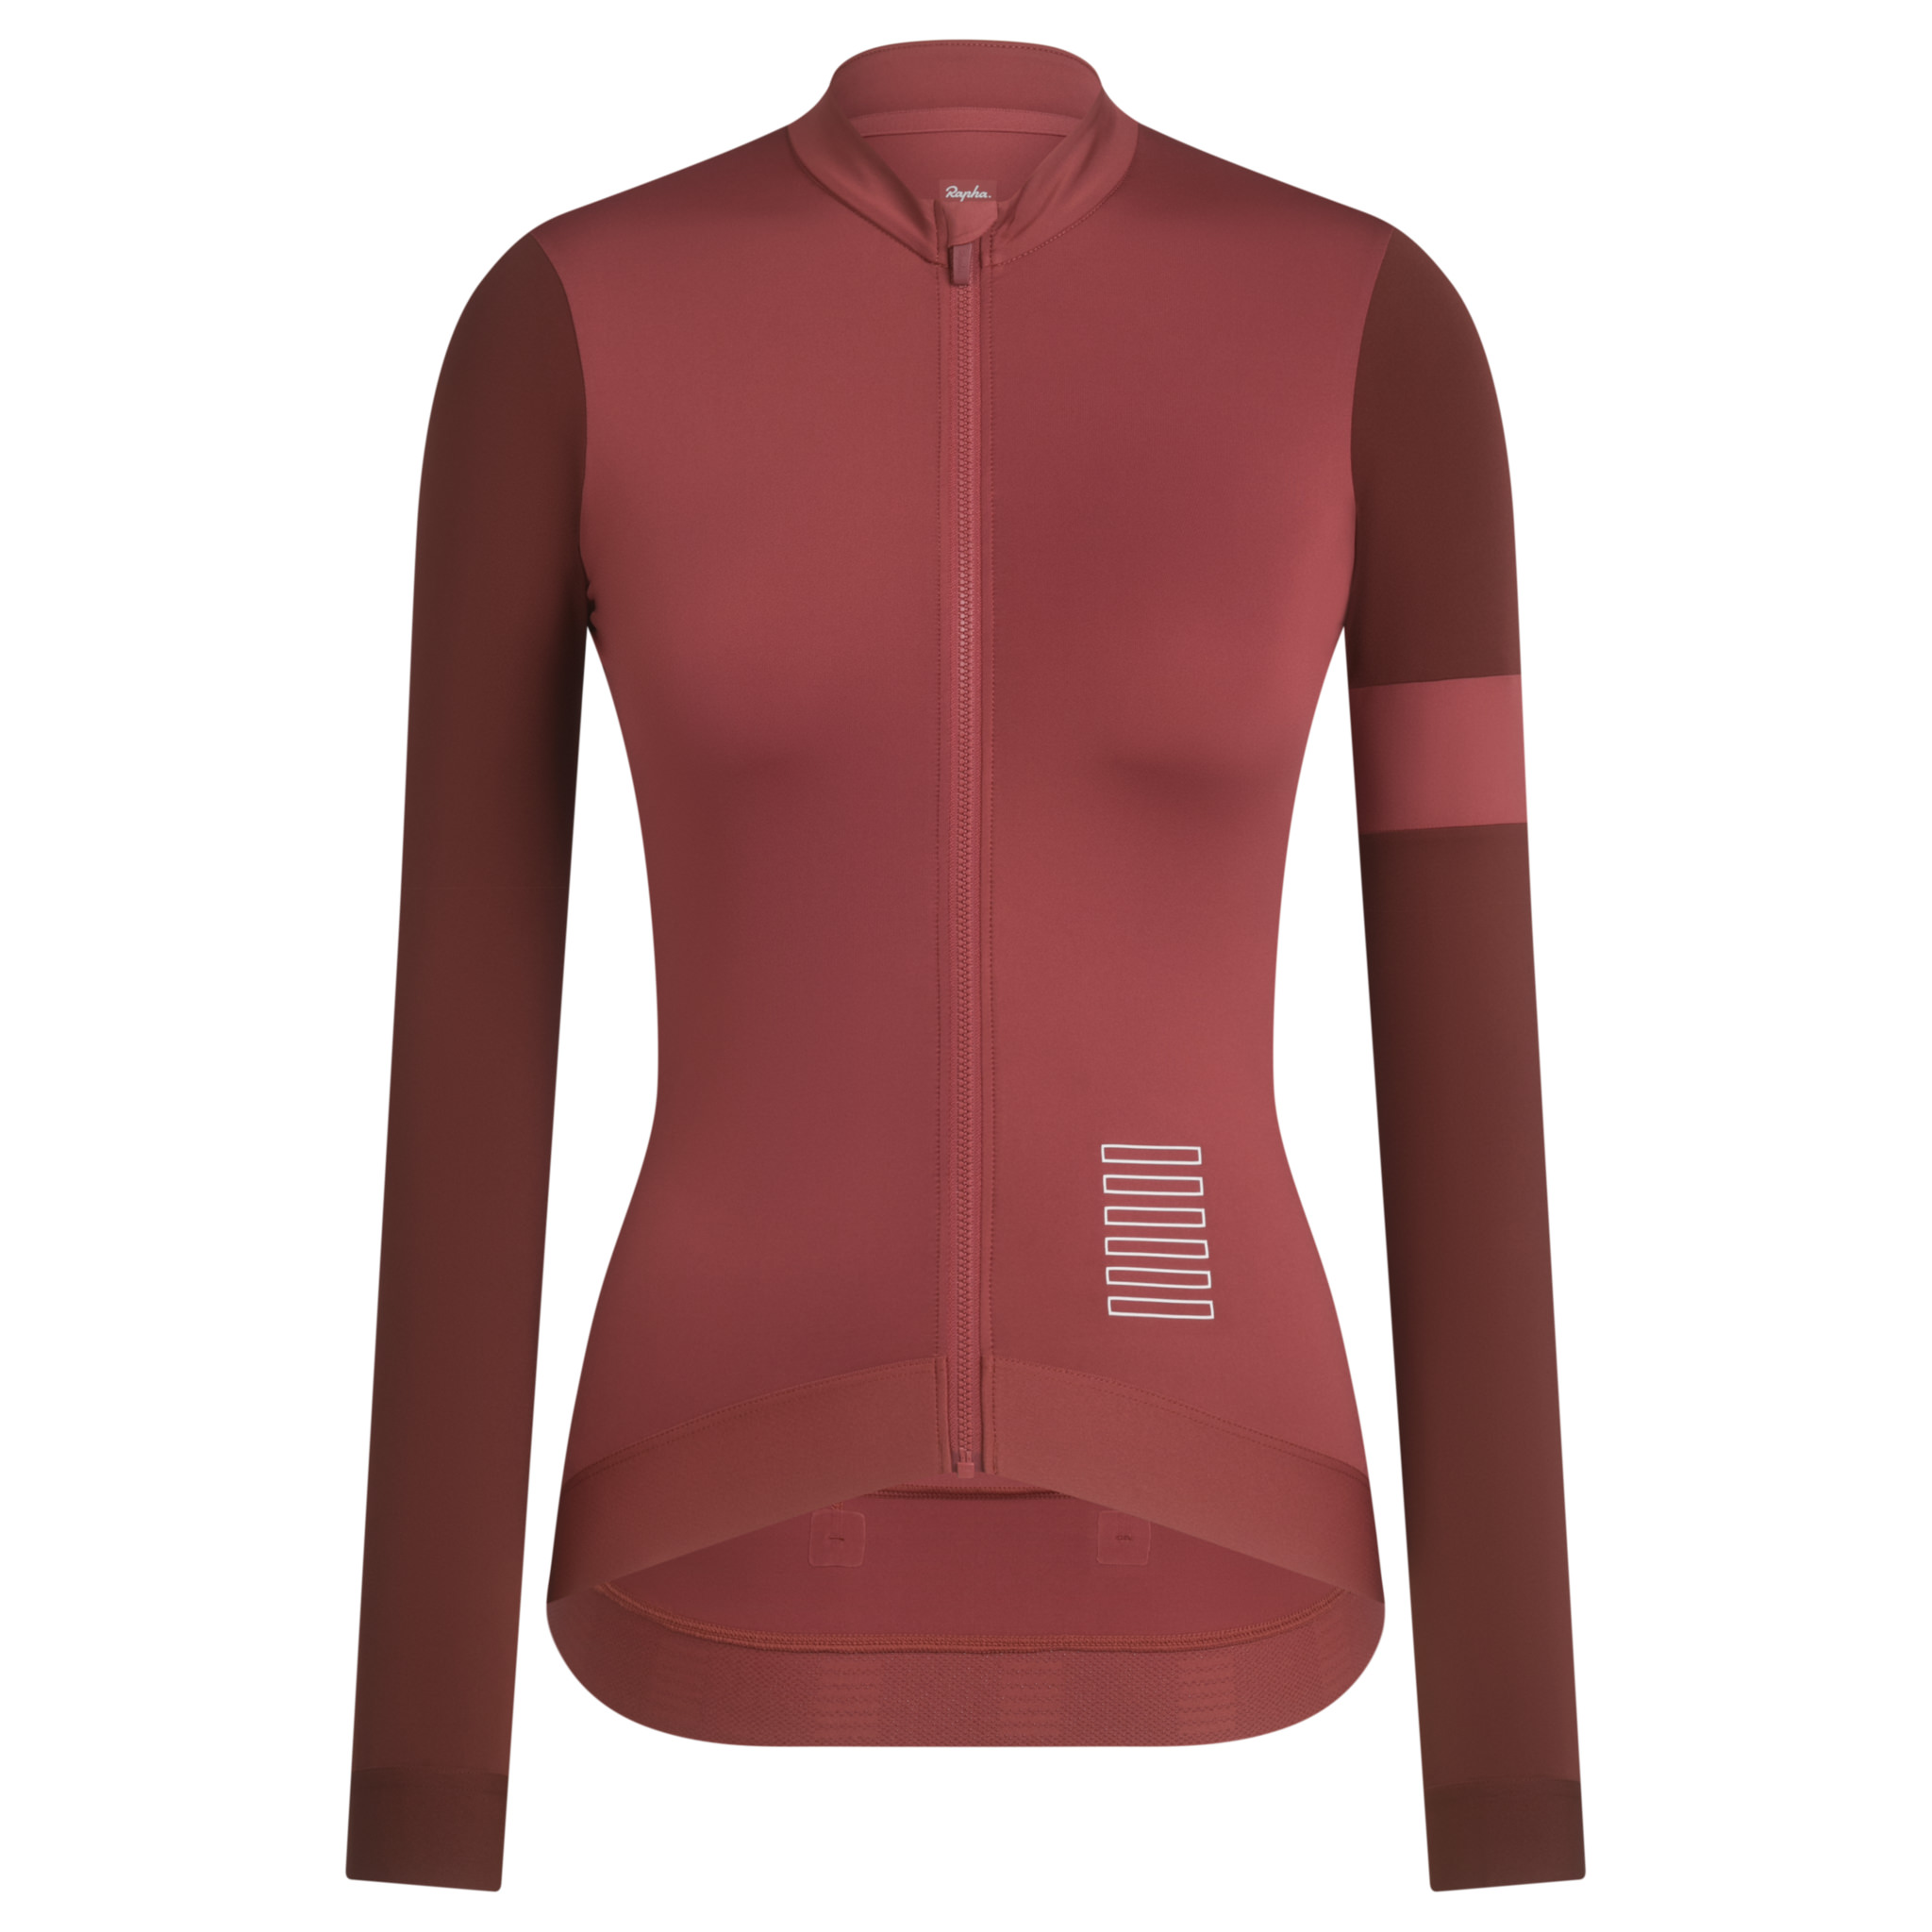 Women's Pro Team Long Sleeve Training Jersey | Cycling Top For 